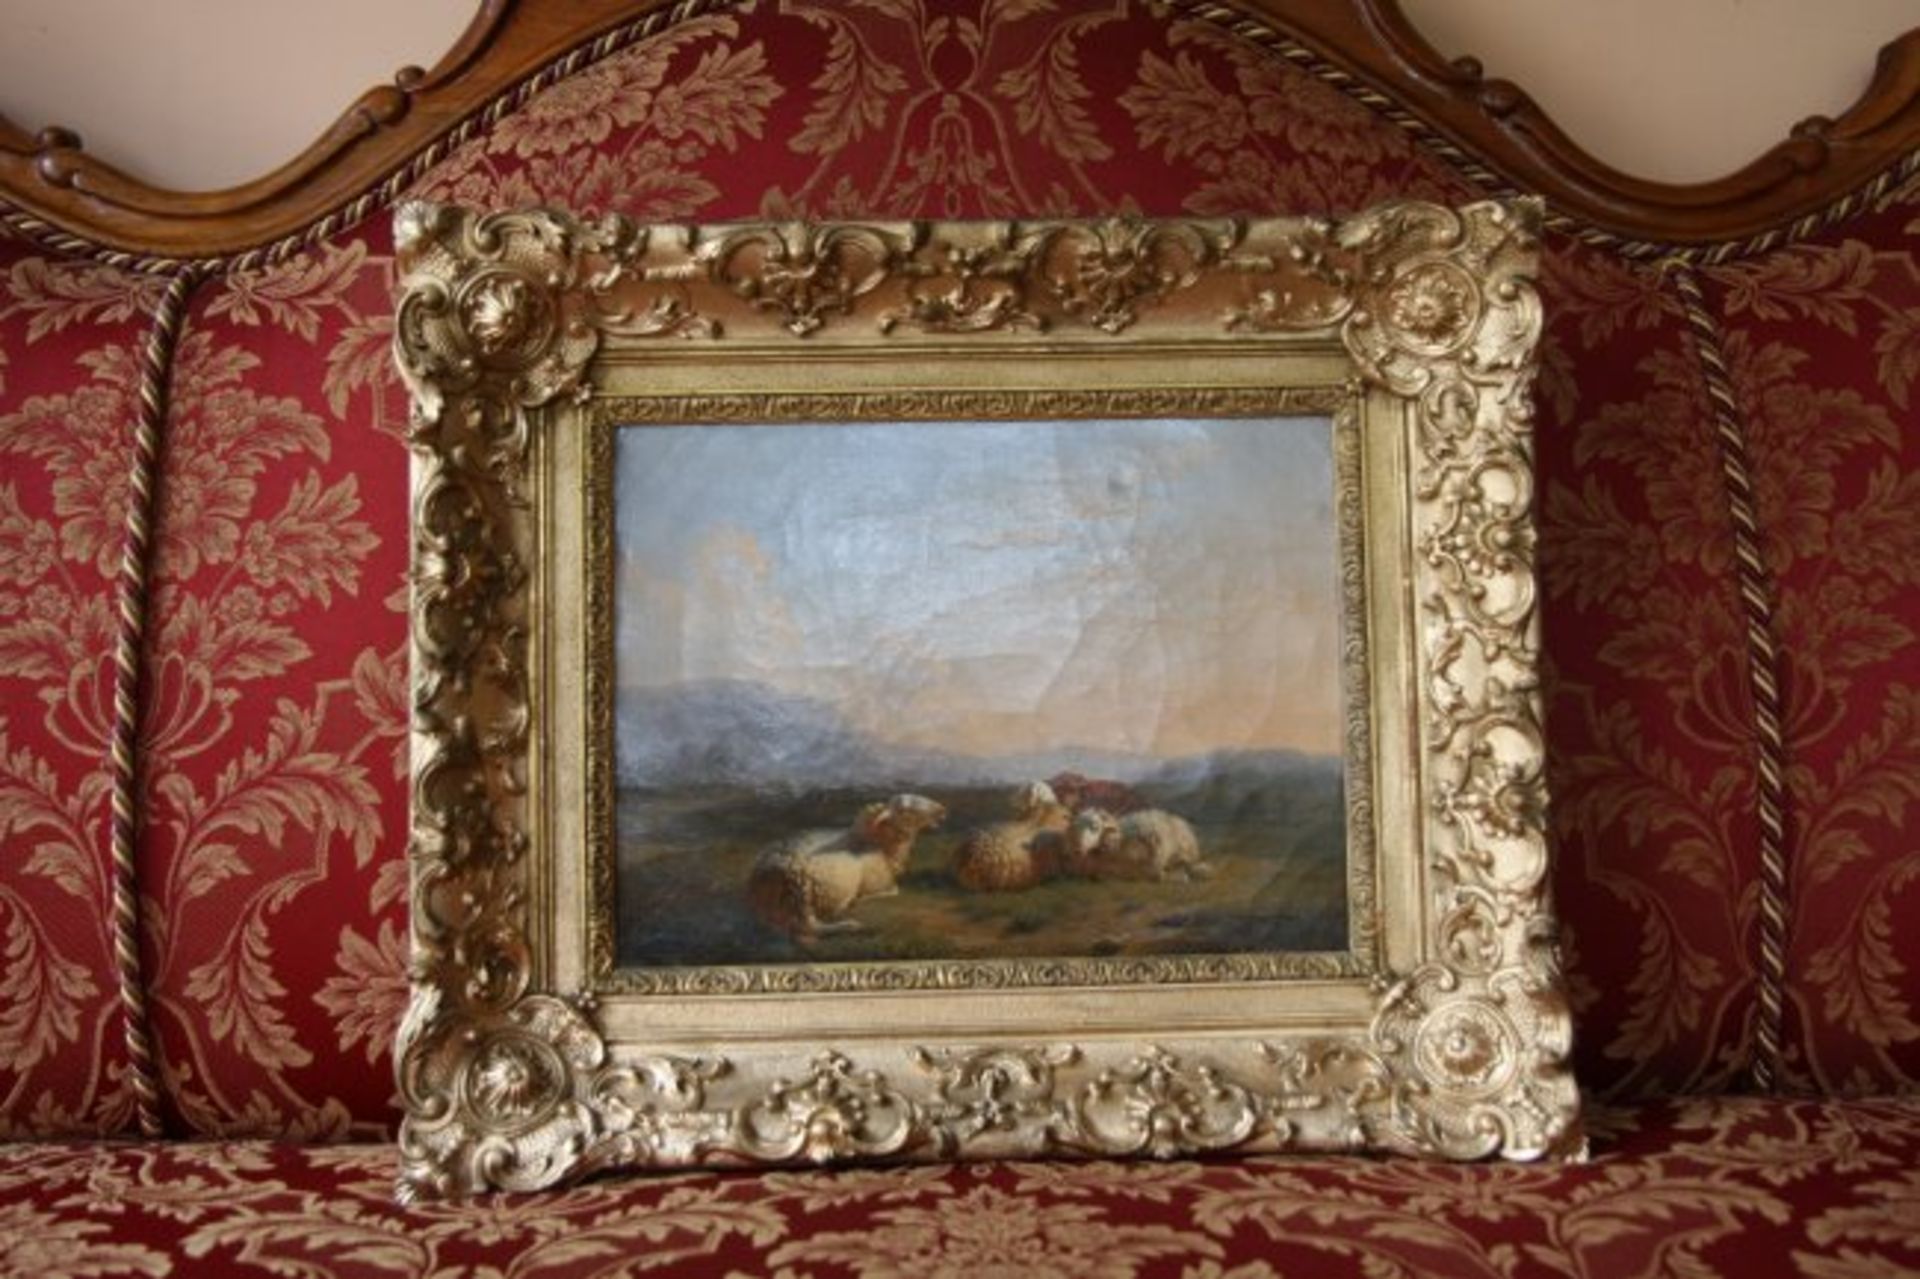 Painting "Sheep in the evening light" - Image 6 of 6